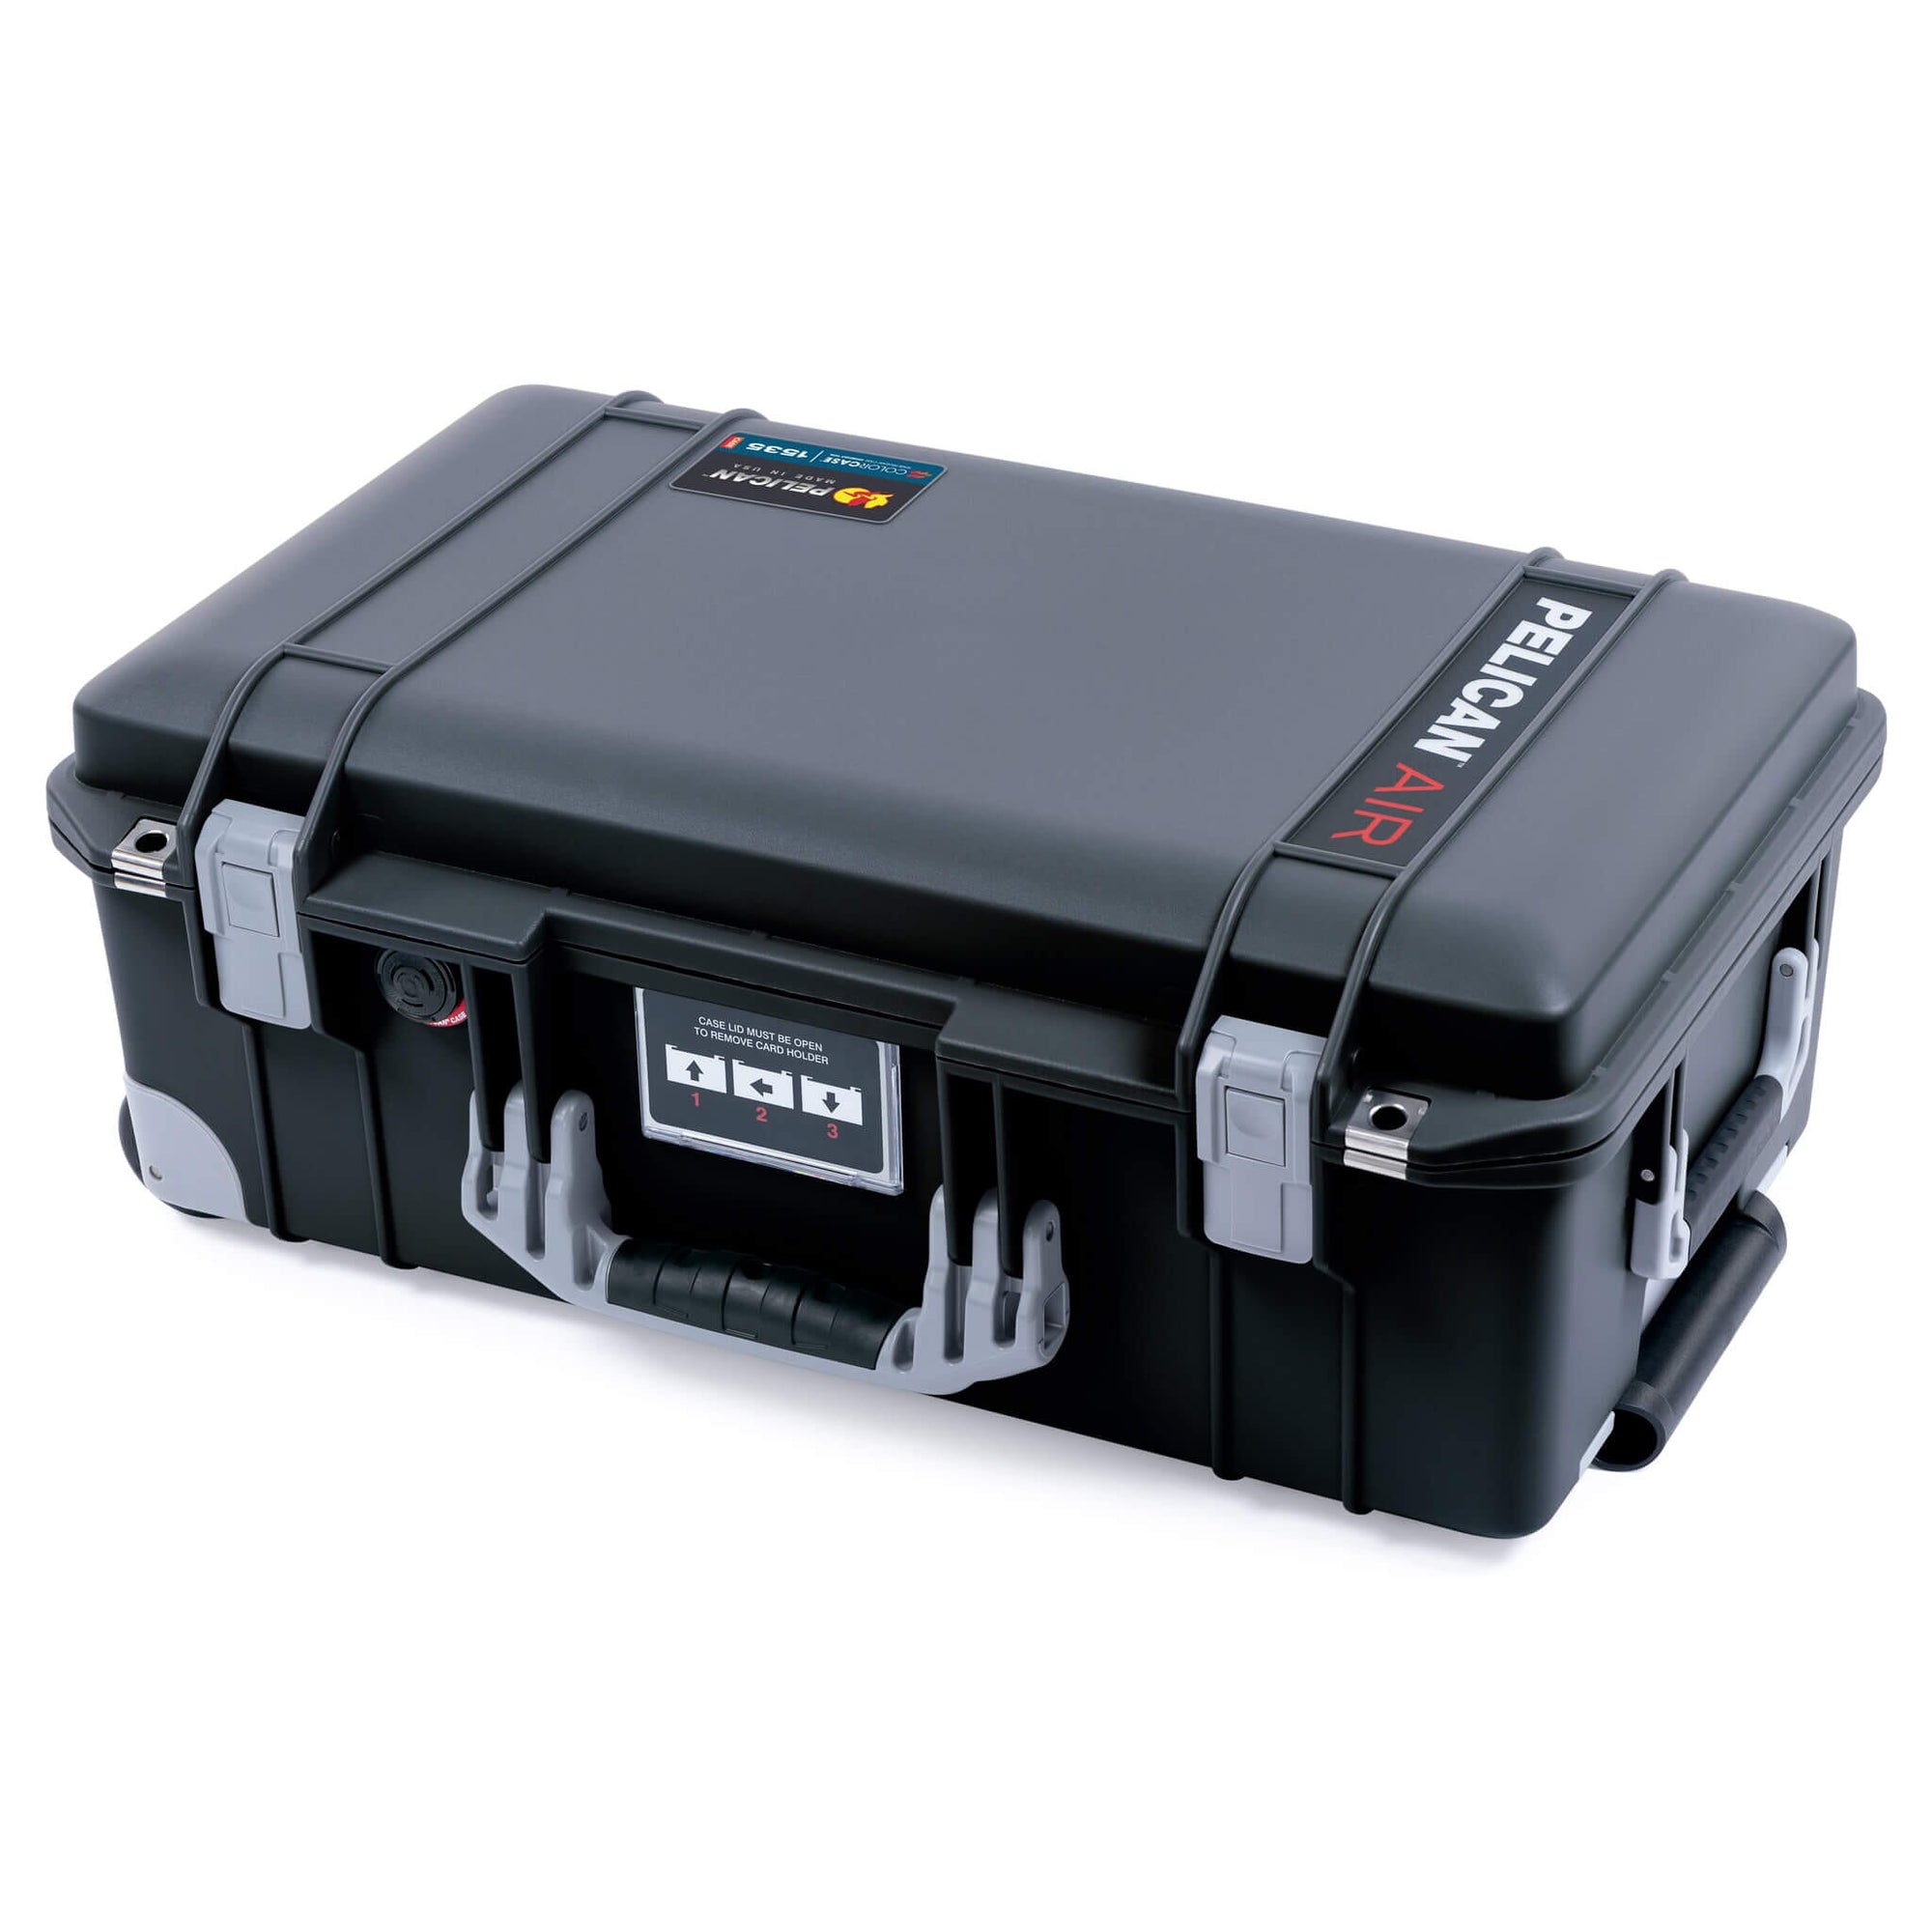 Pelican 1535 Air Case, Black with Silver Handles, Latches & Trolley